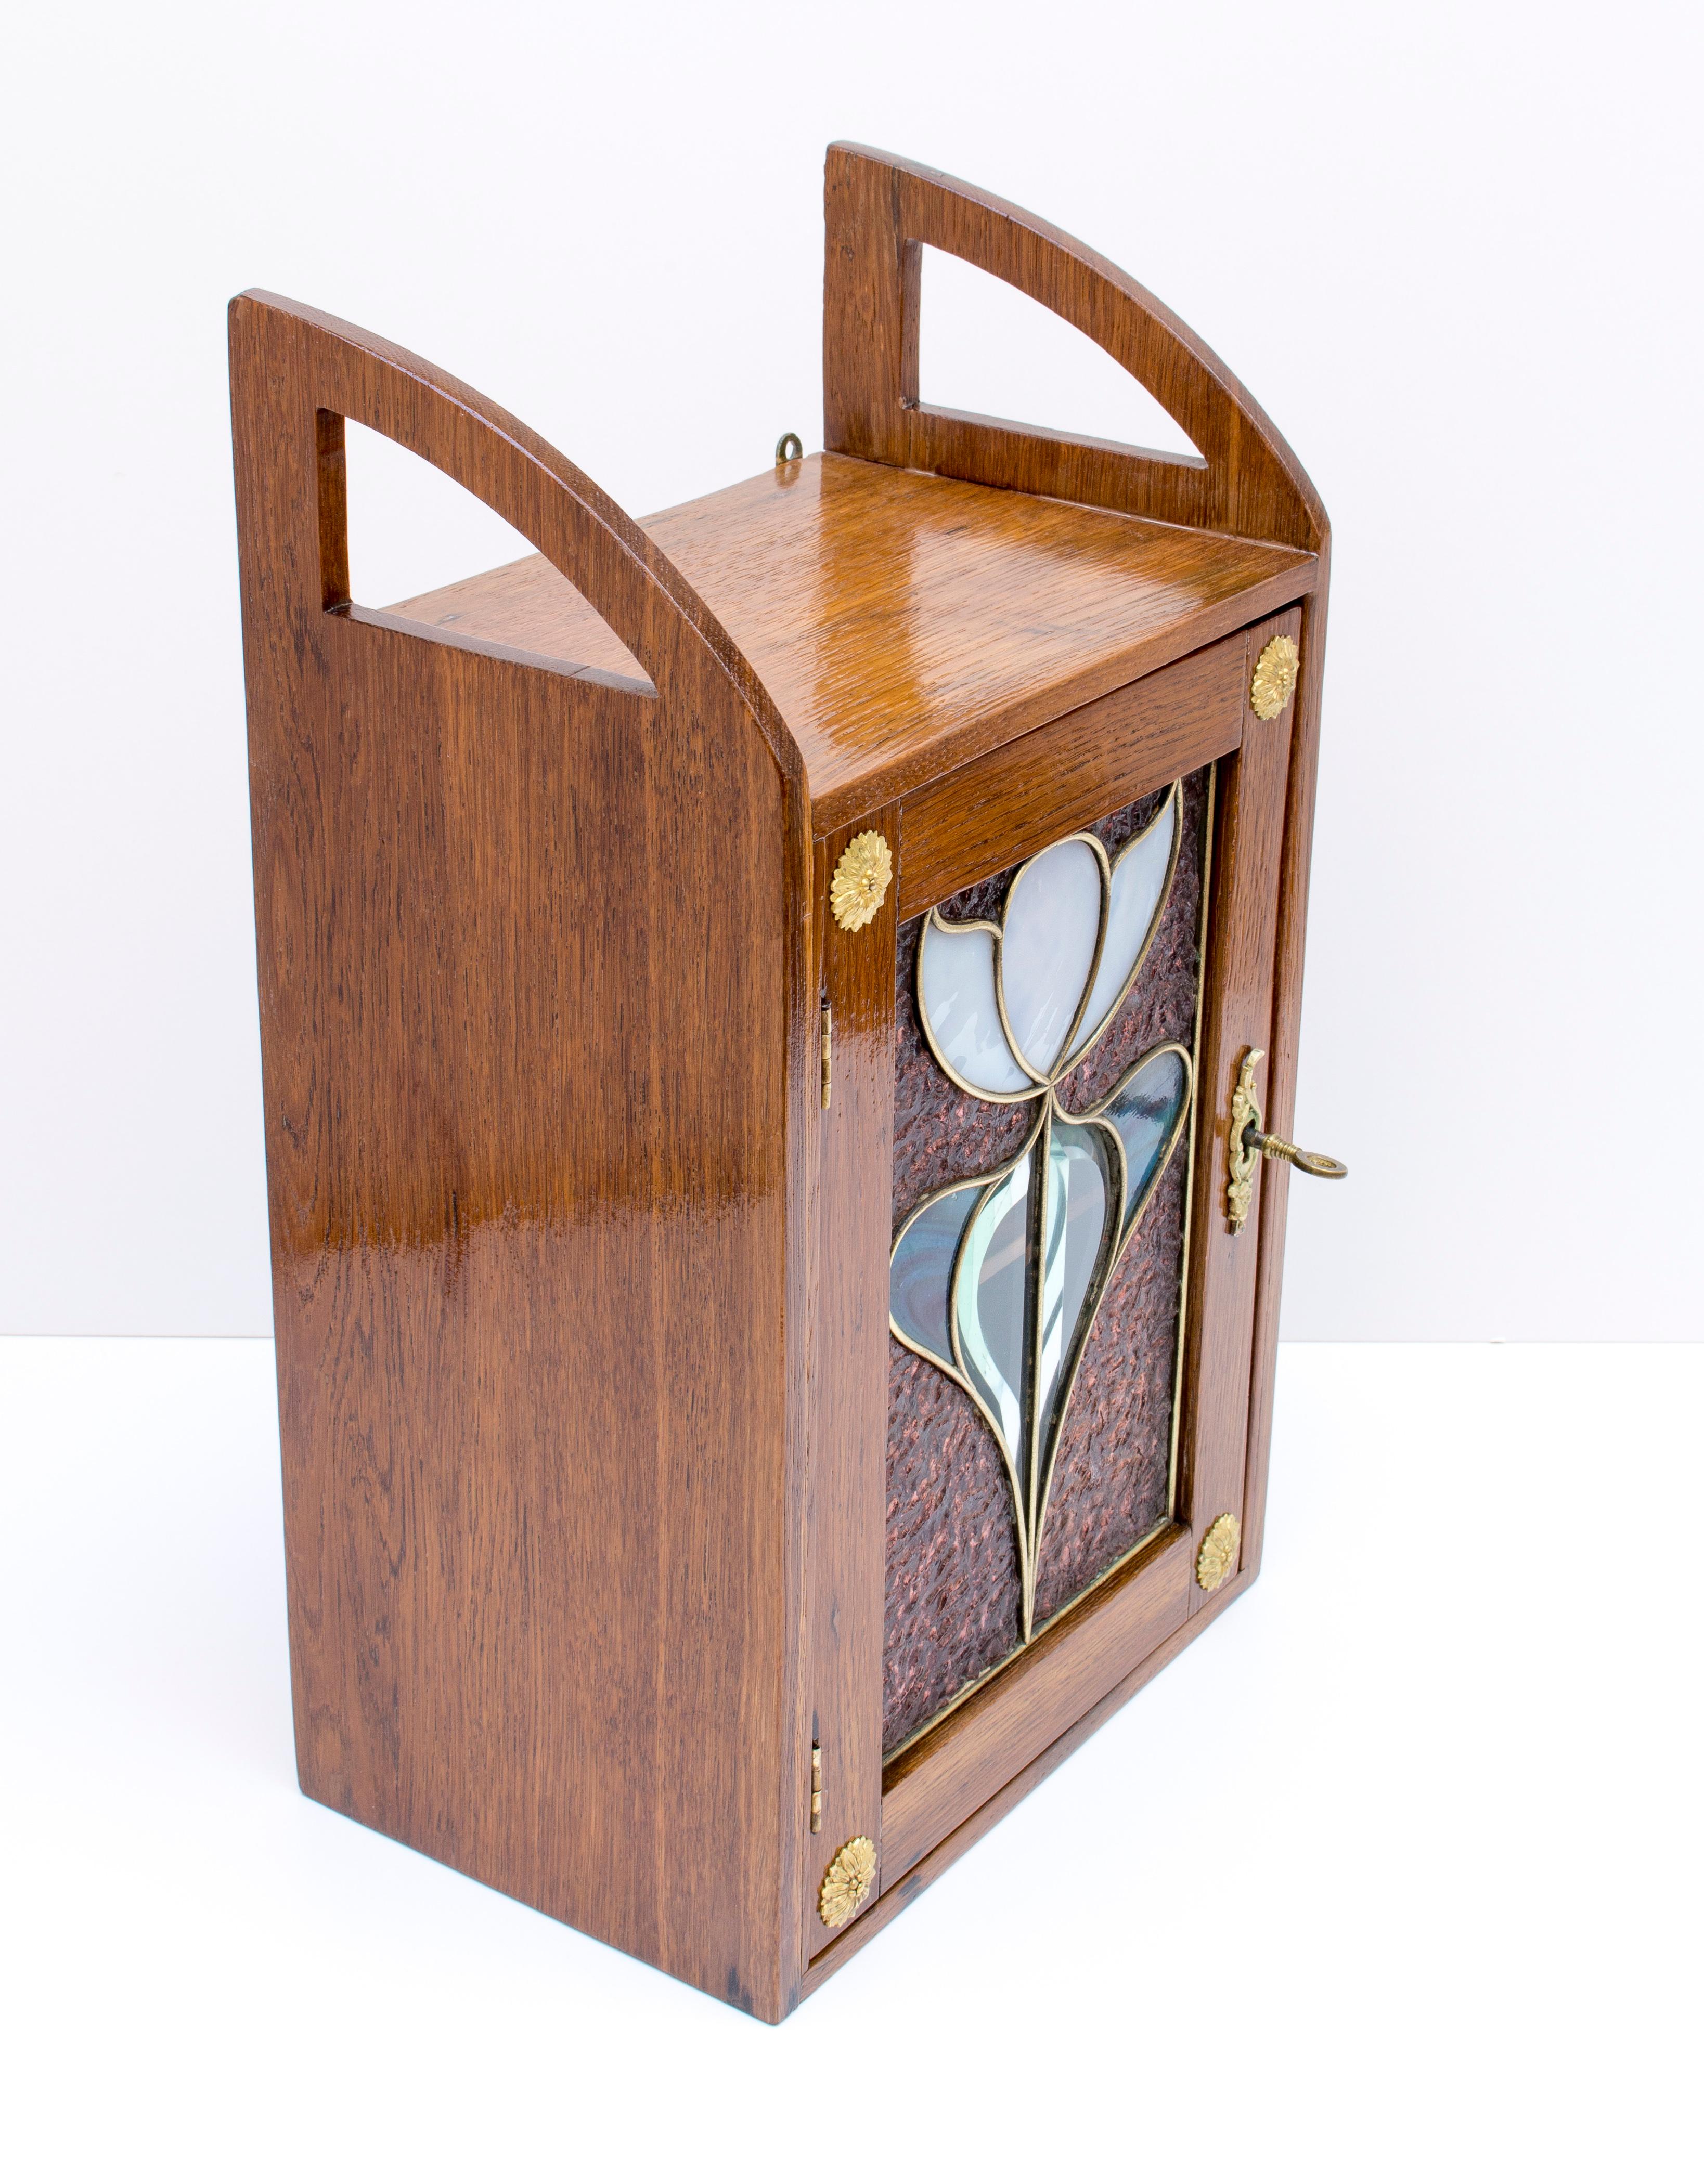 Beautiful hanging wall cabinet from the time of Art Nouveau, circa 1895 made of oak wood made with the original Art Nouveau glass. In very good restored condition.